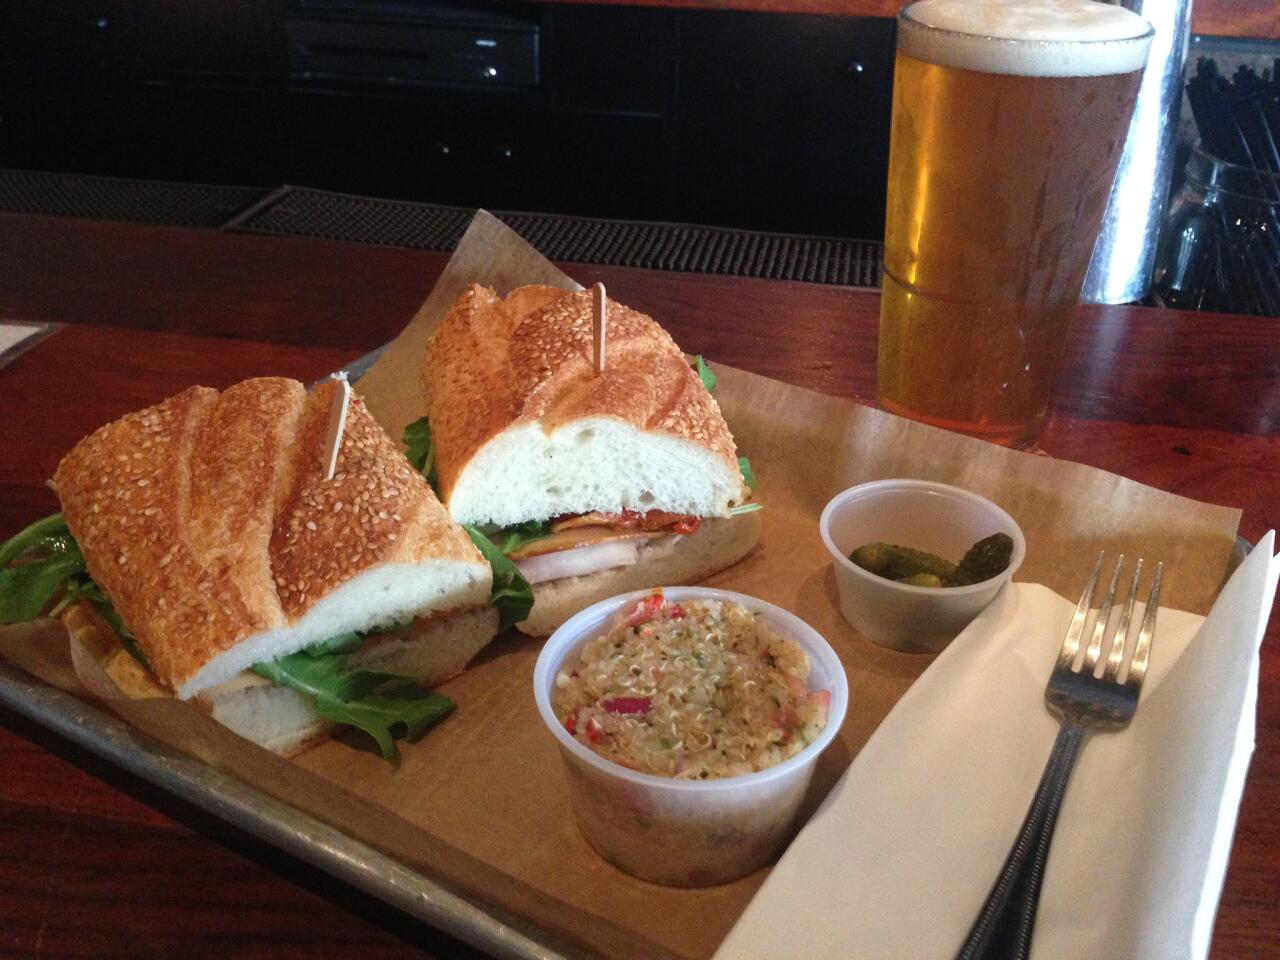 The turkey and smoked mozzarella sandwich ($9) with a happy hour beer ($4).